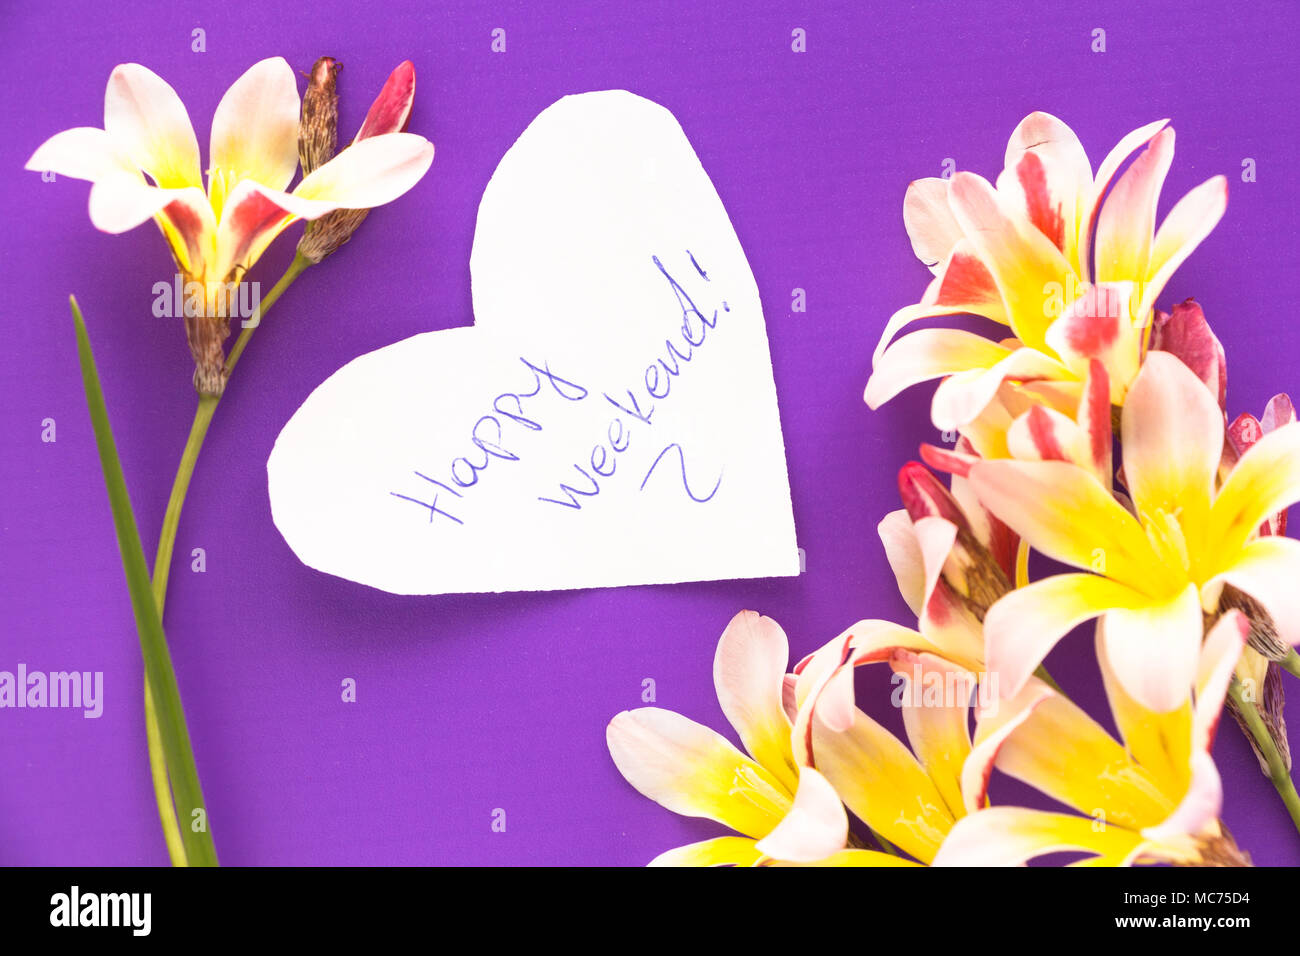 Note in shape of heart with words "Happy Weekend!" with flowers on purple surface. Stock Photo